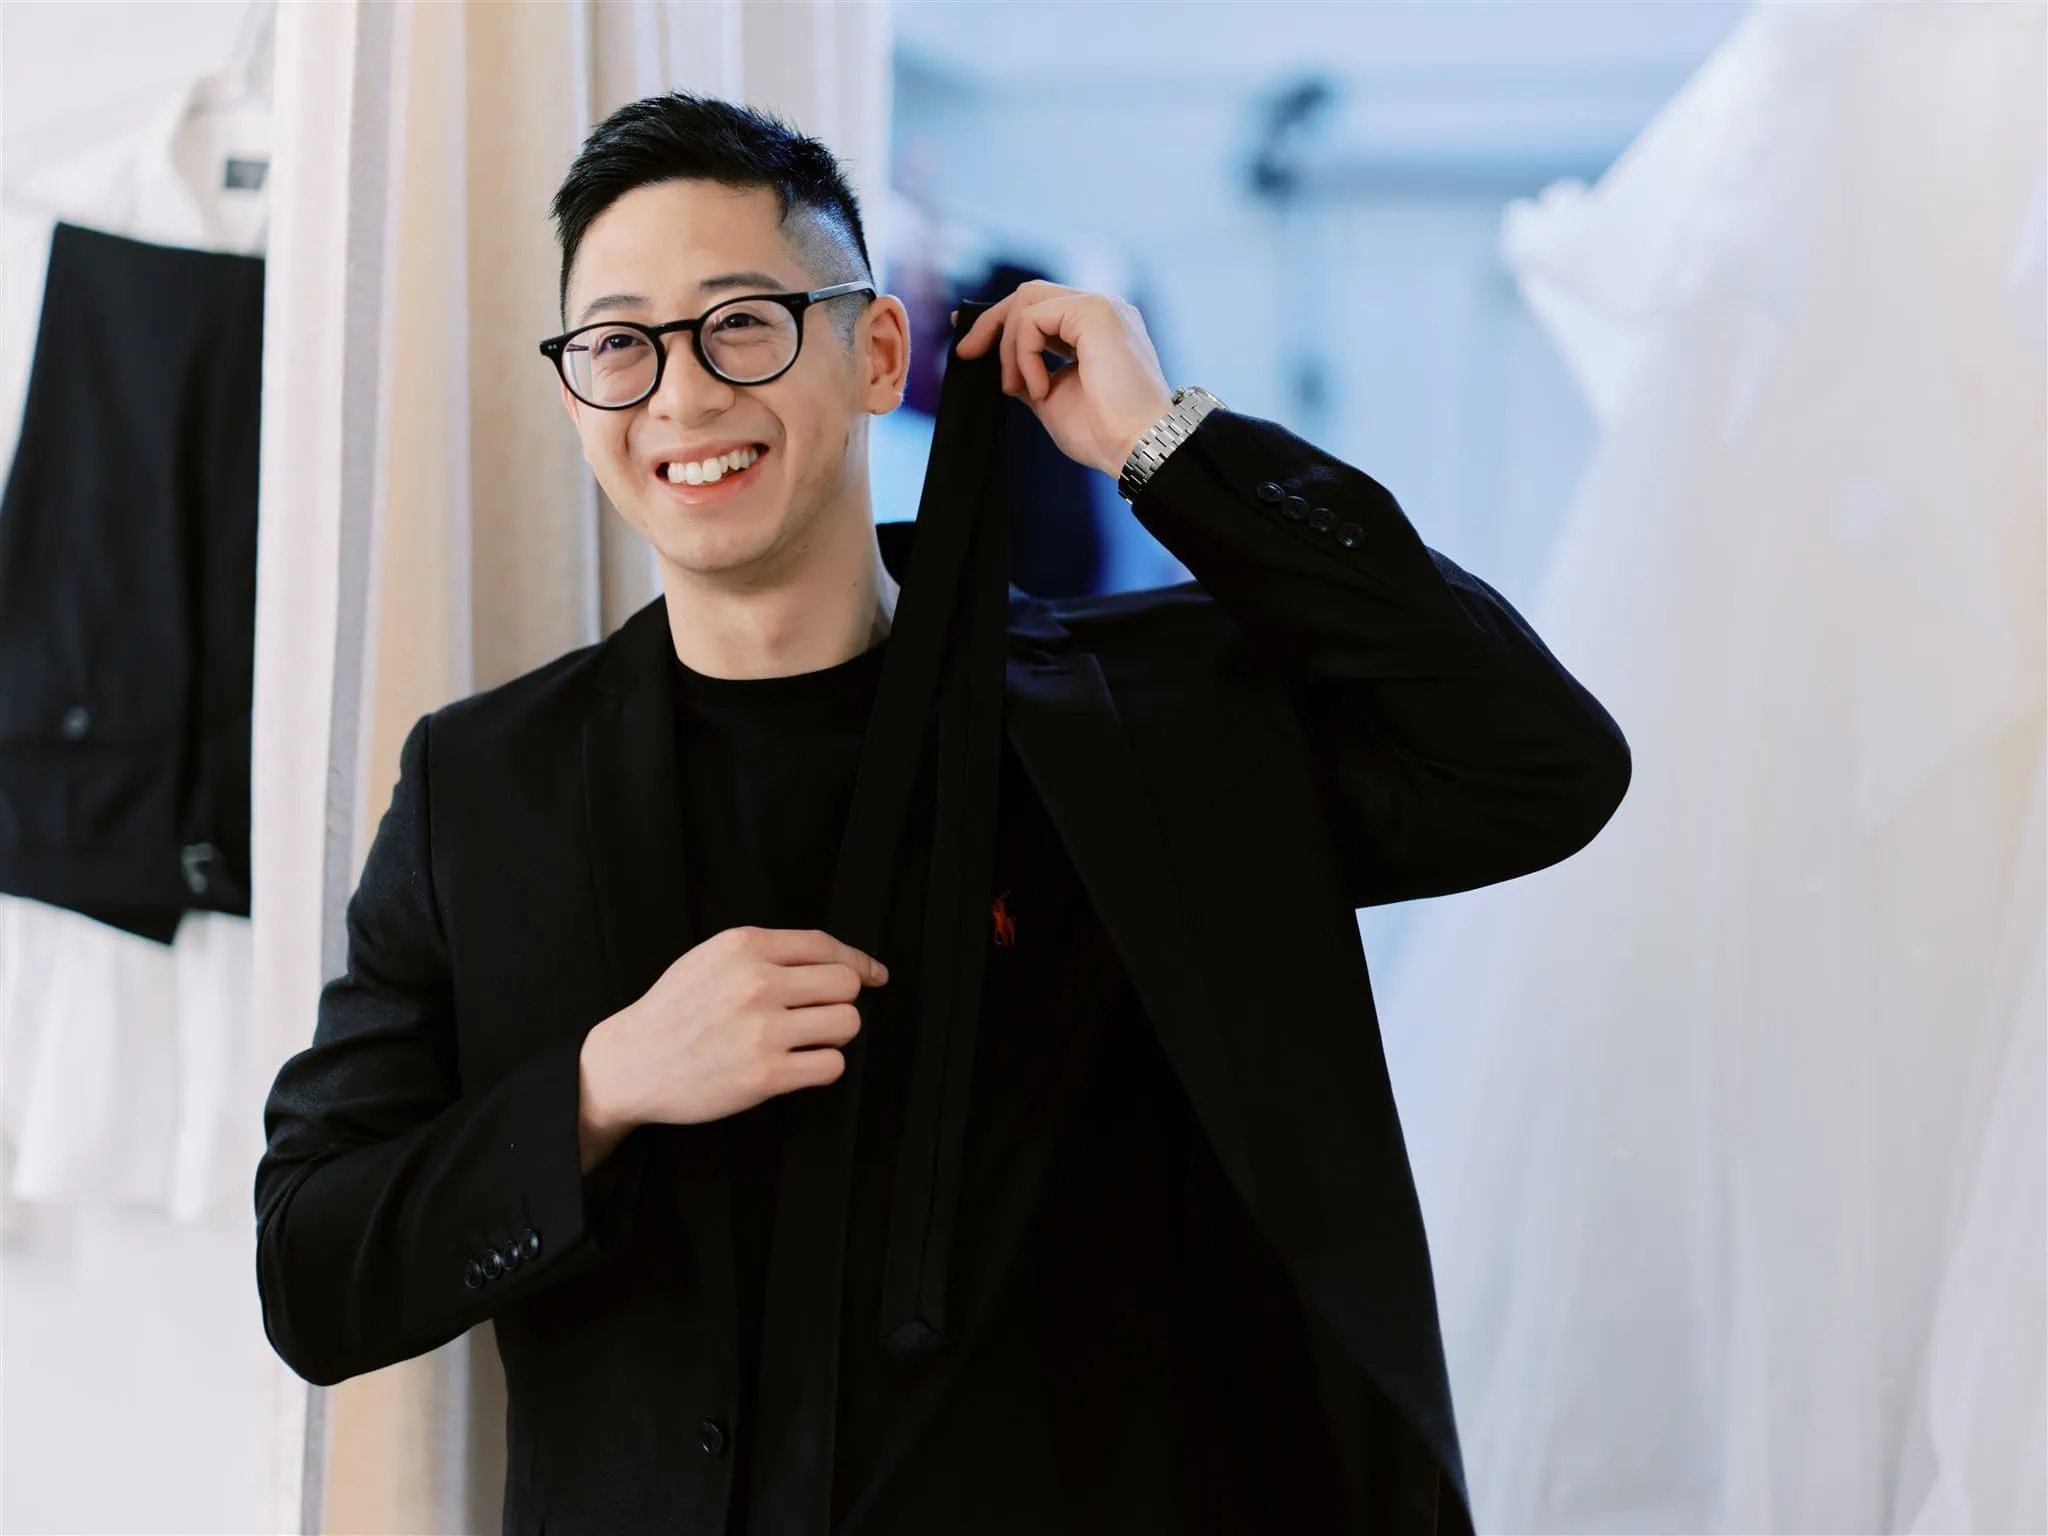 Kyoto Tokyo Japan Elopement Wedding Photographer, Planner & Videographer | A man wearing glasses and a suit in a dress shop searching for the perfect attire for his Japan elopement.